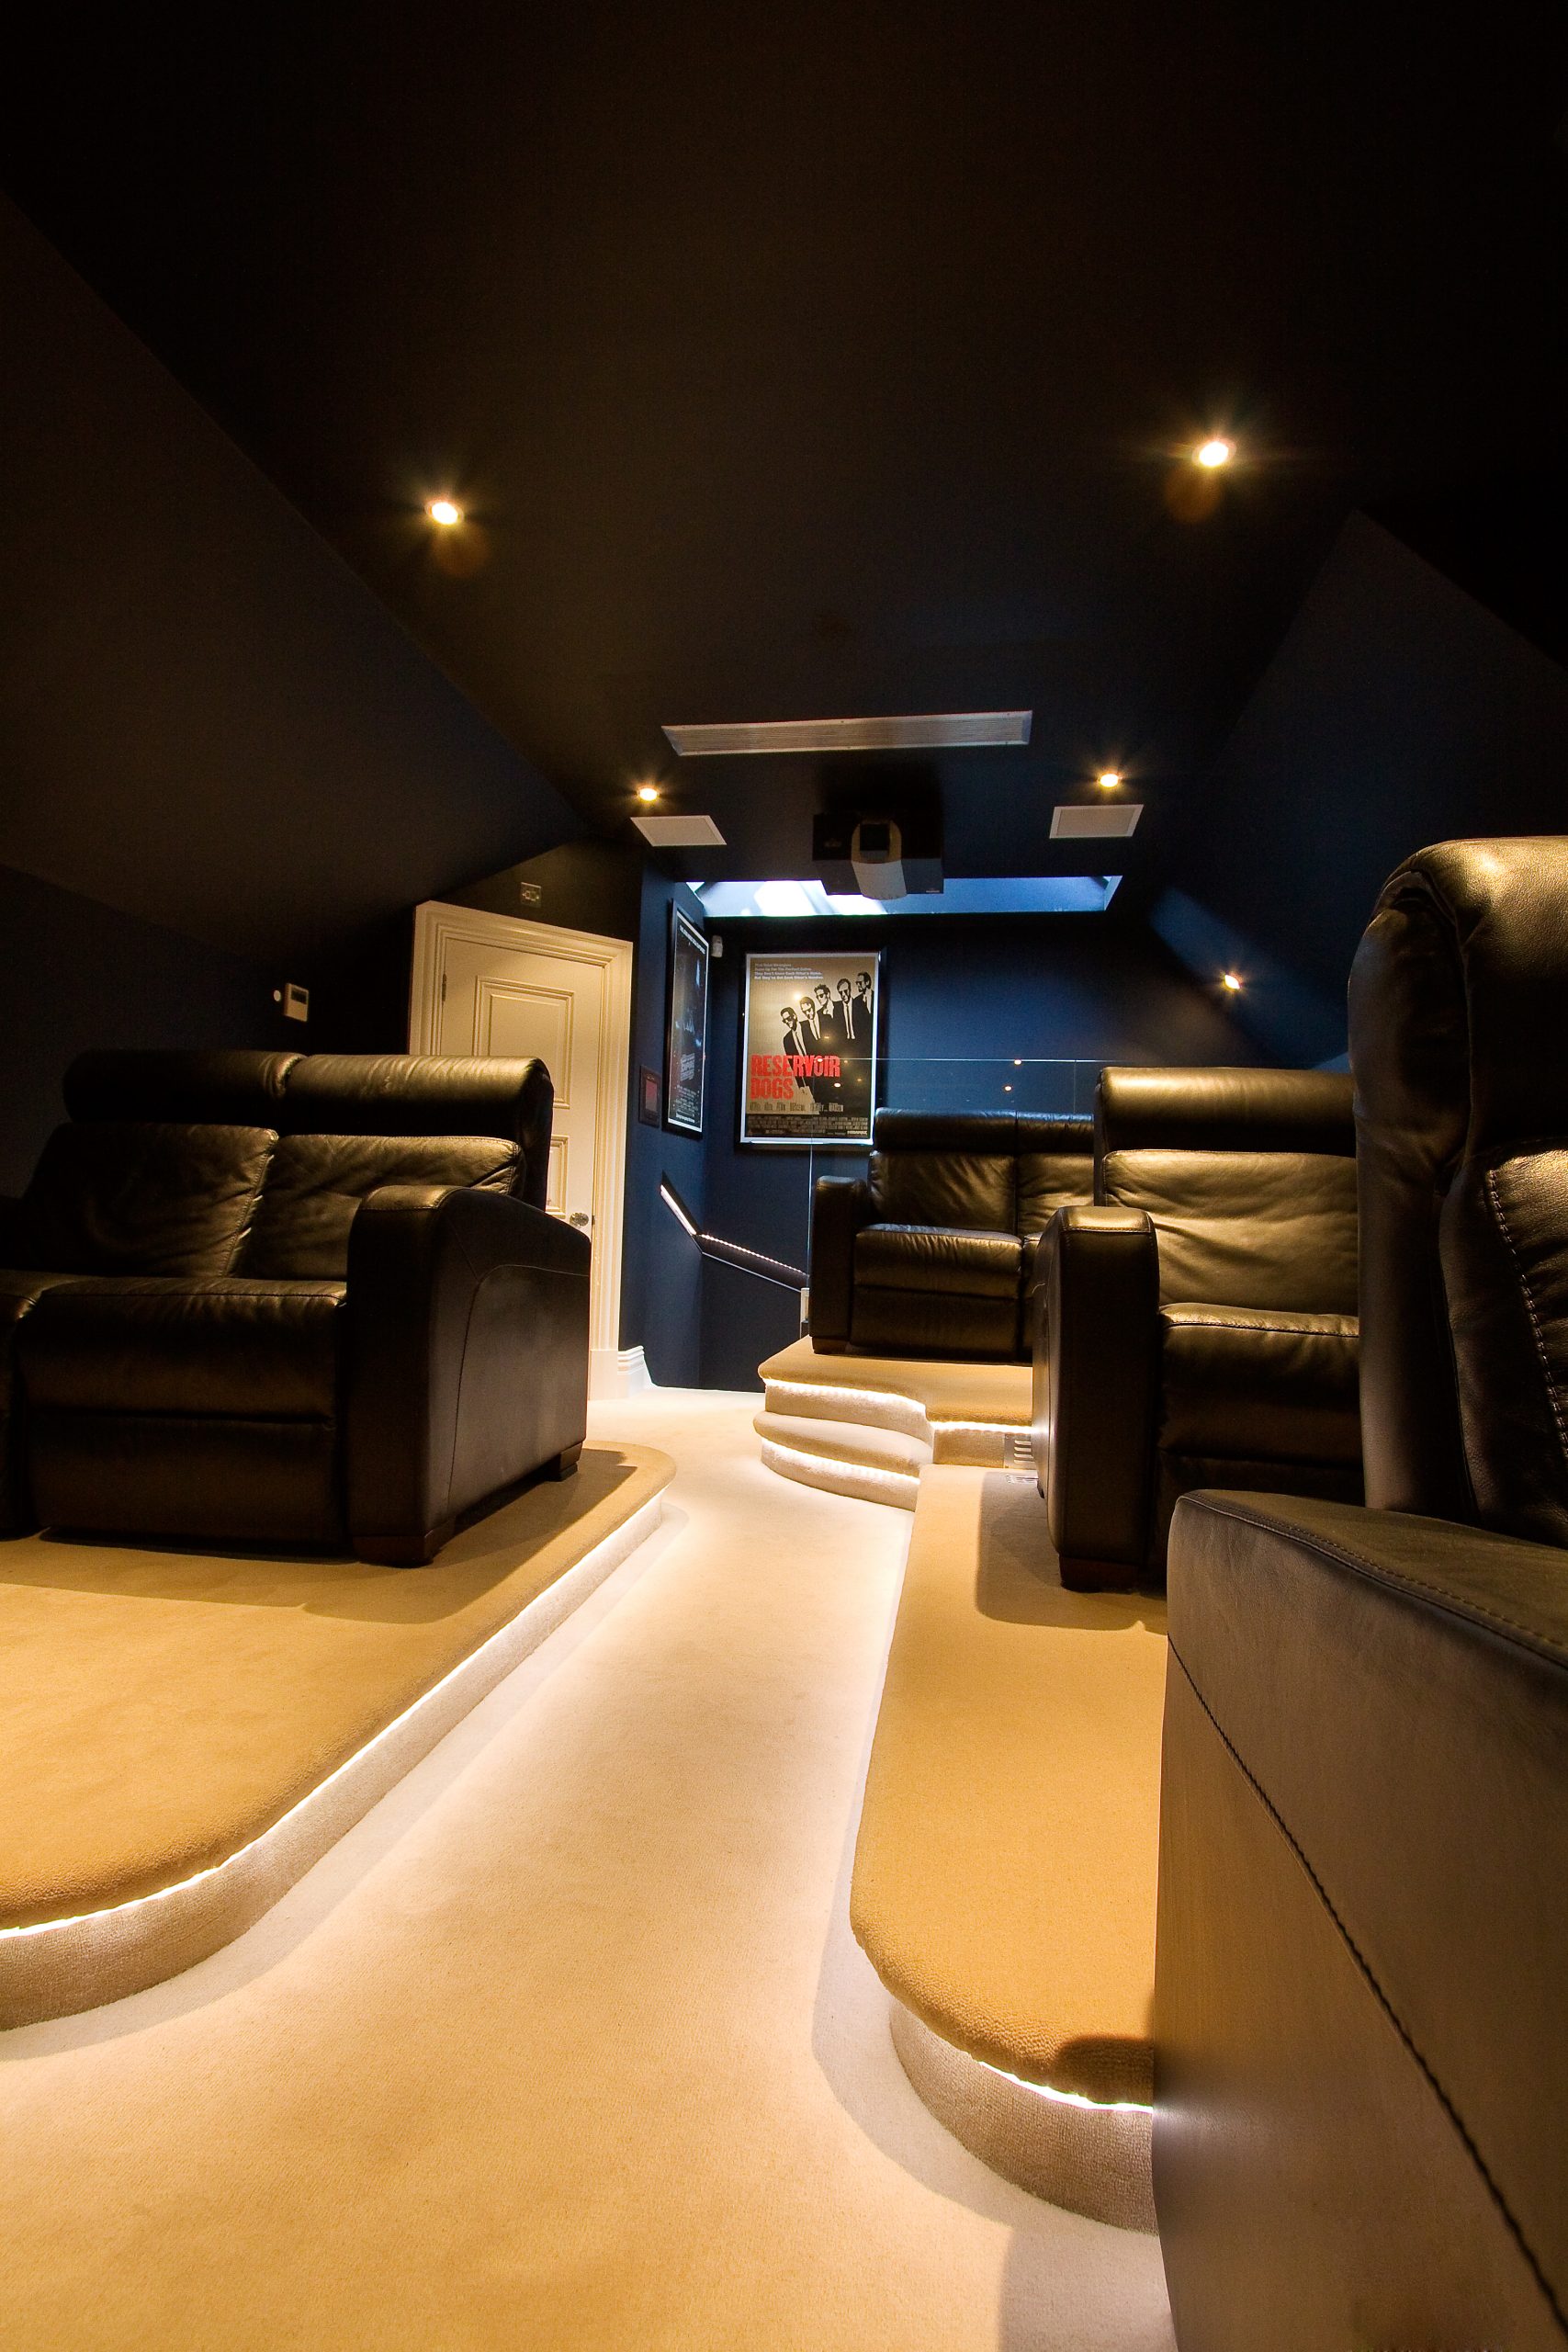 Image shows rear of home cinema with projector mounted on ceiling.